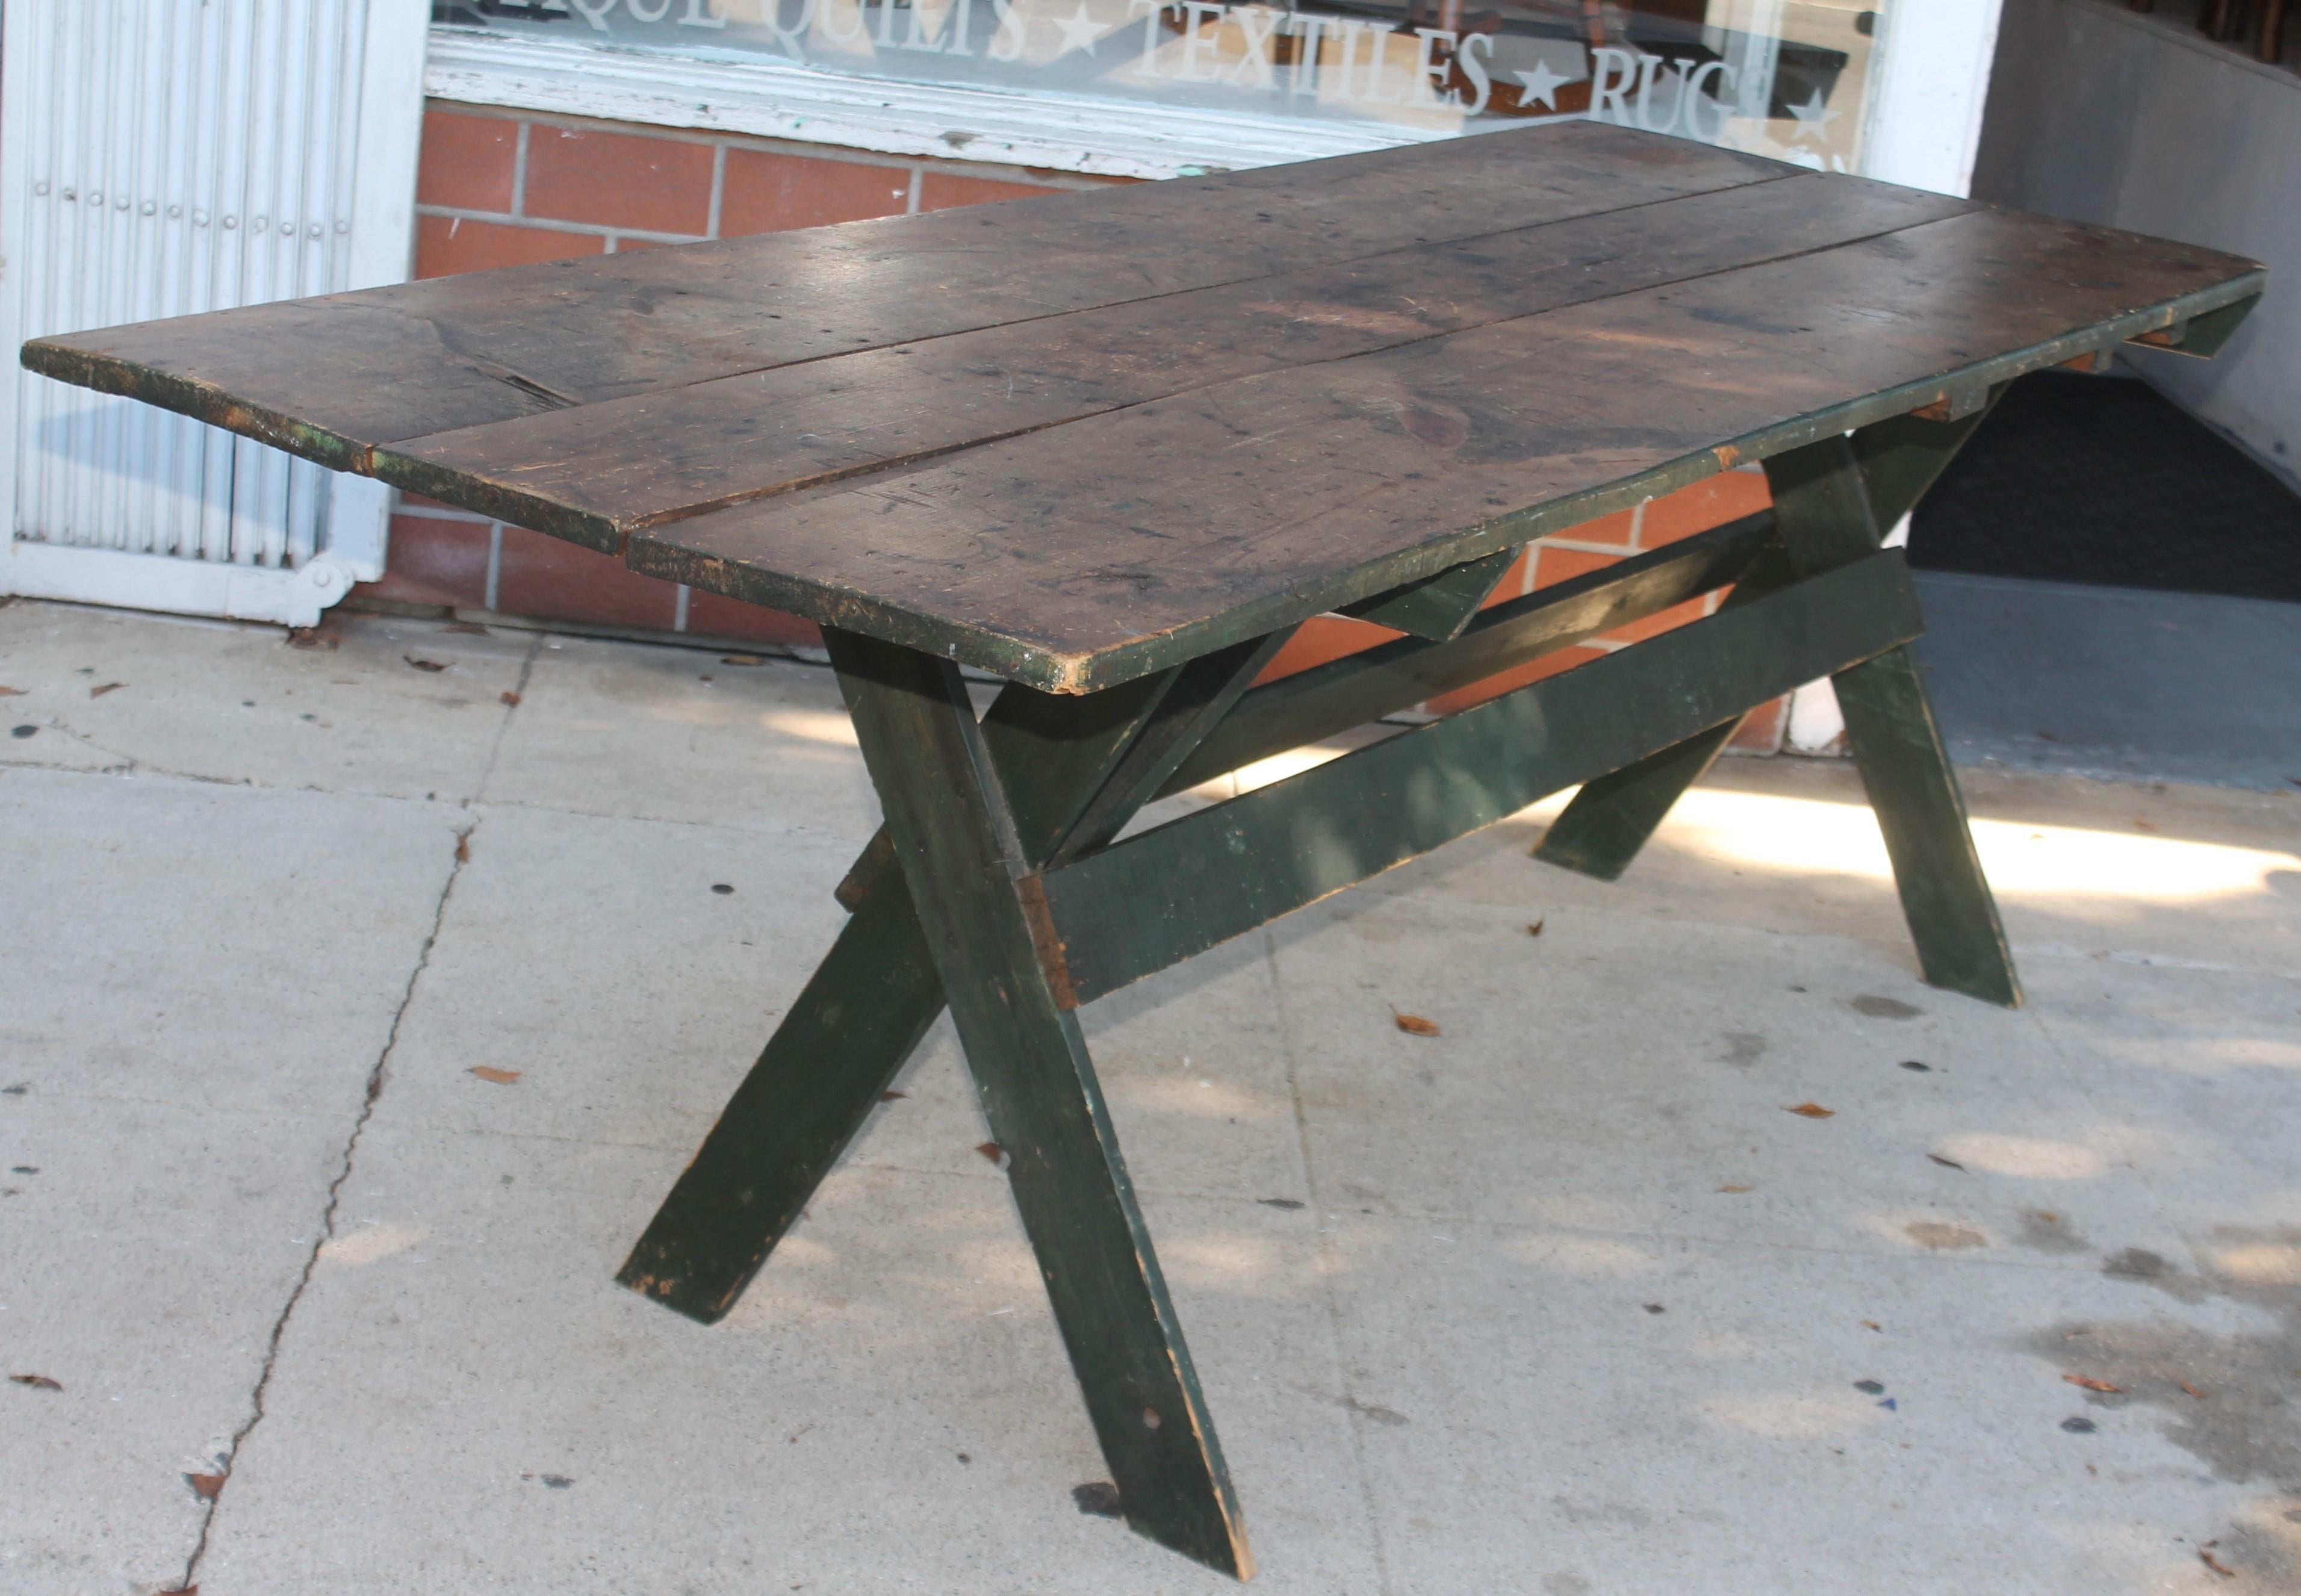 This fantastic over sized sawbuck table in original painted surface. The surface is amazing and undisturbed surface. This is a original painted base and a original scrub top. The construction is square nailed and wood pegs.